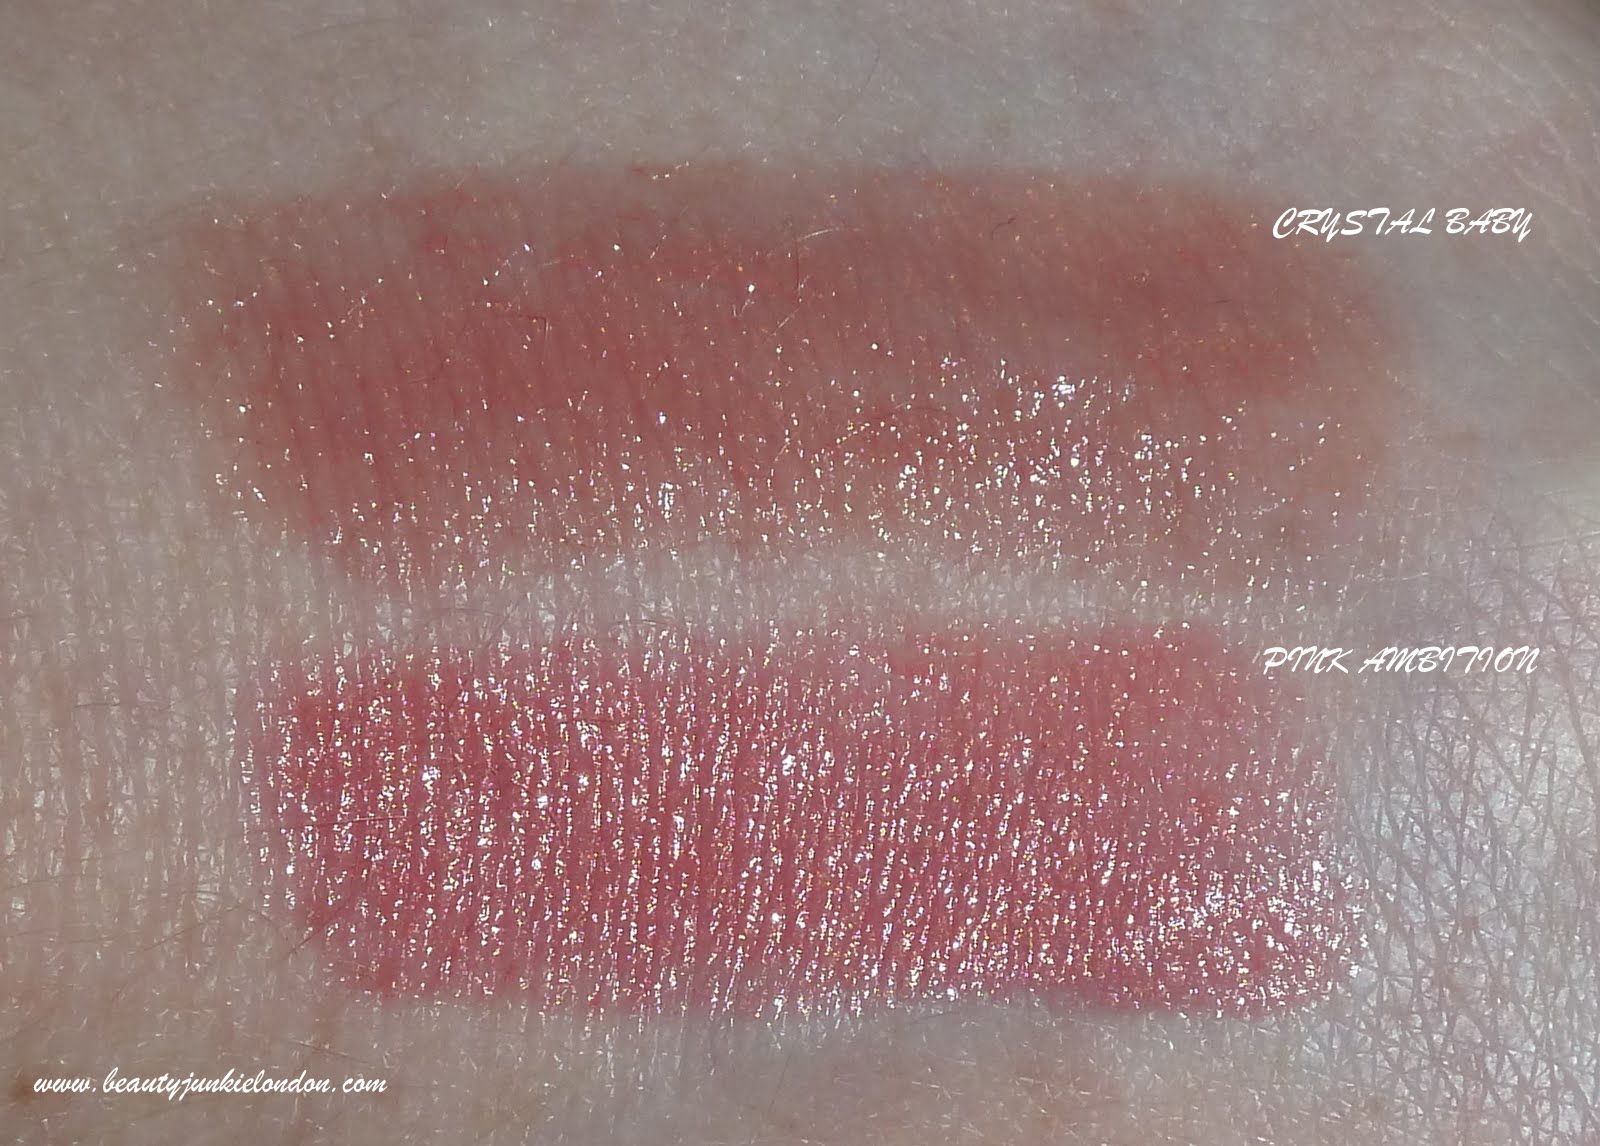 Estee Lauder Pure Colour Long Lasting Lipstick: Pink Ambition & Crystal Baby